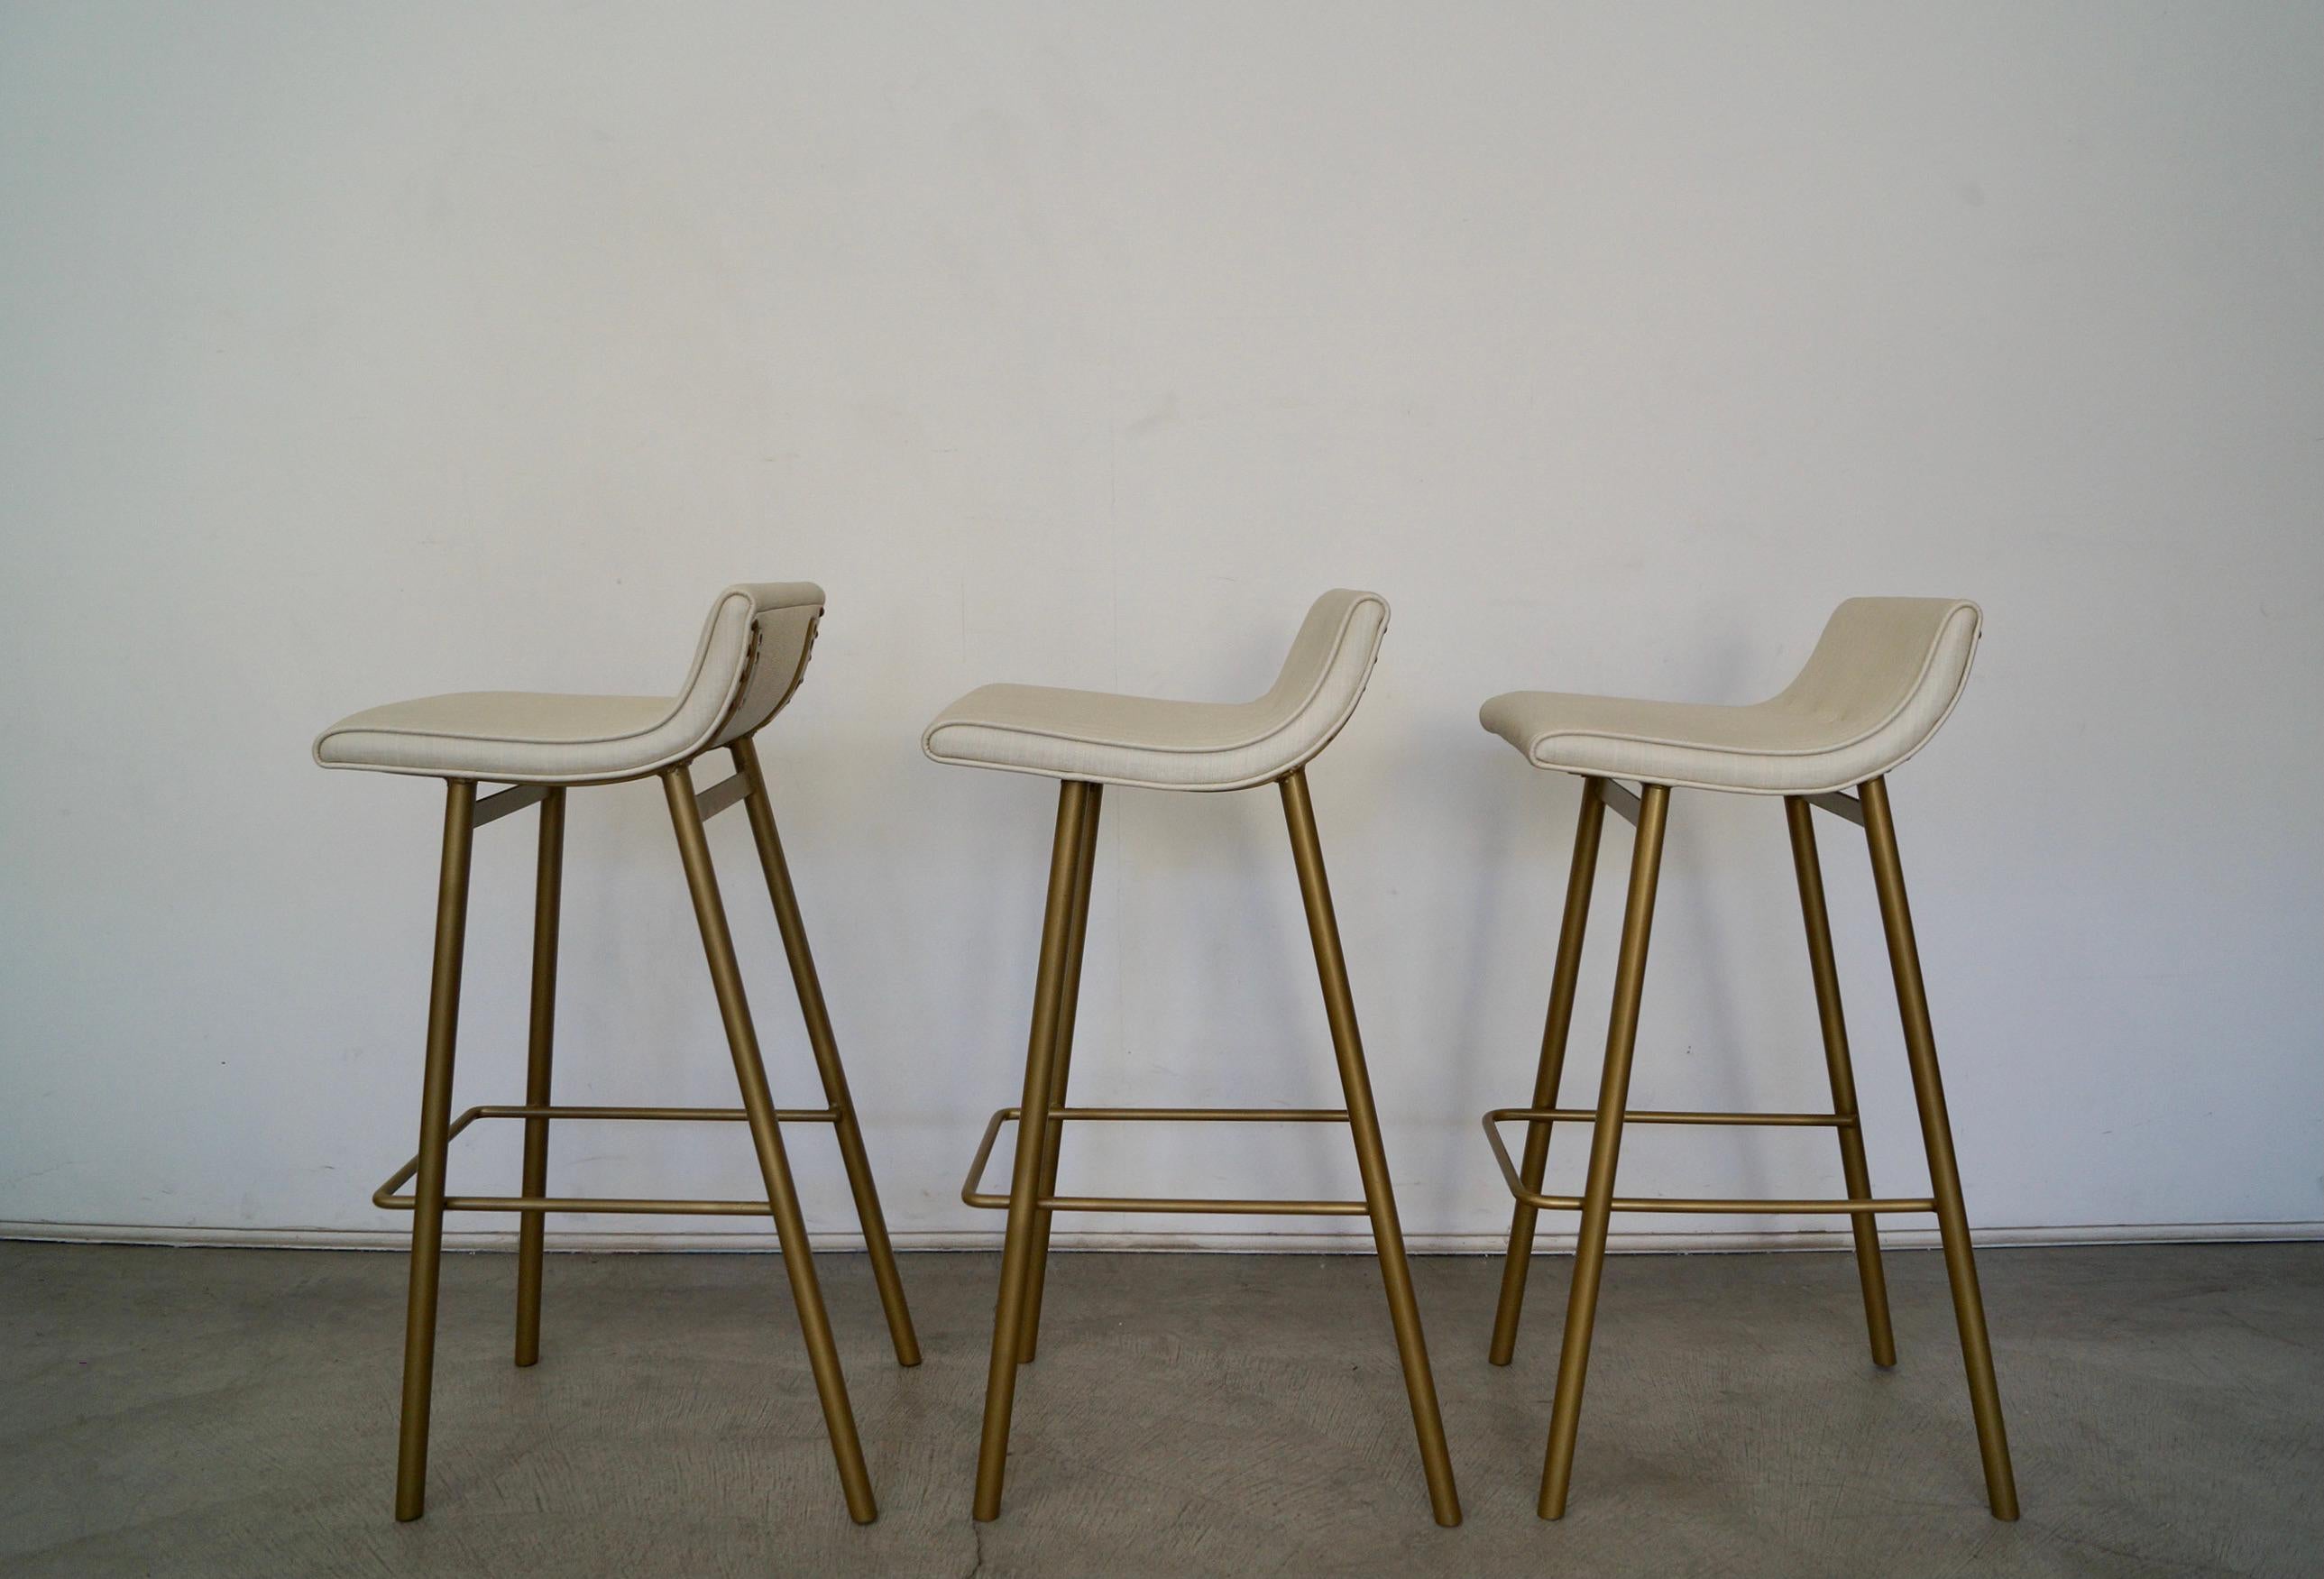 1950's Mid-Century Modern Bar Stools by Vista of California - Set of Three For Sale 1